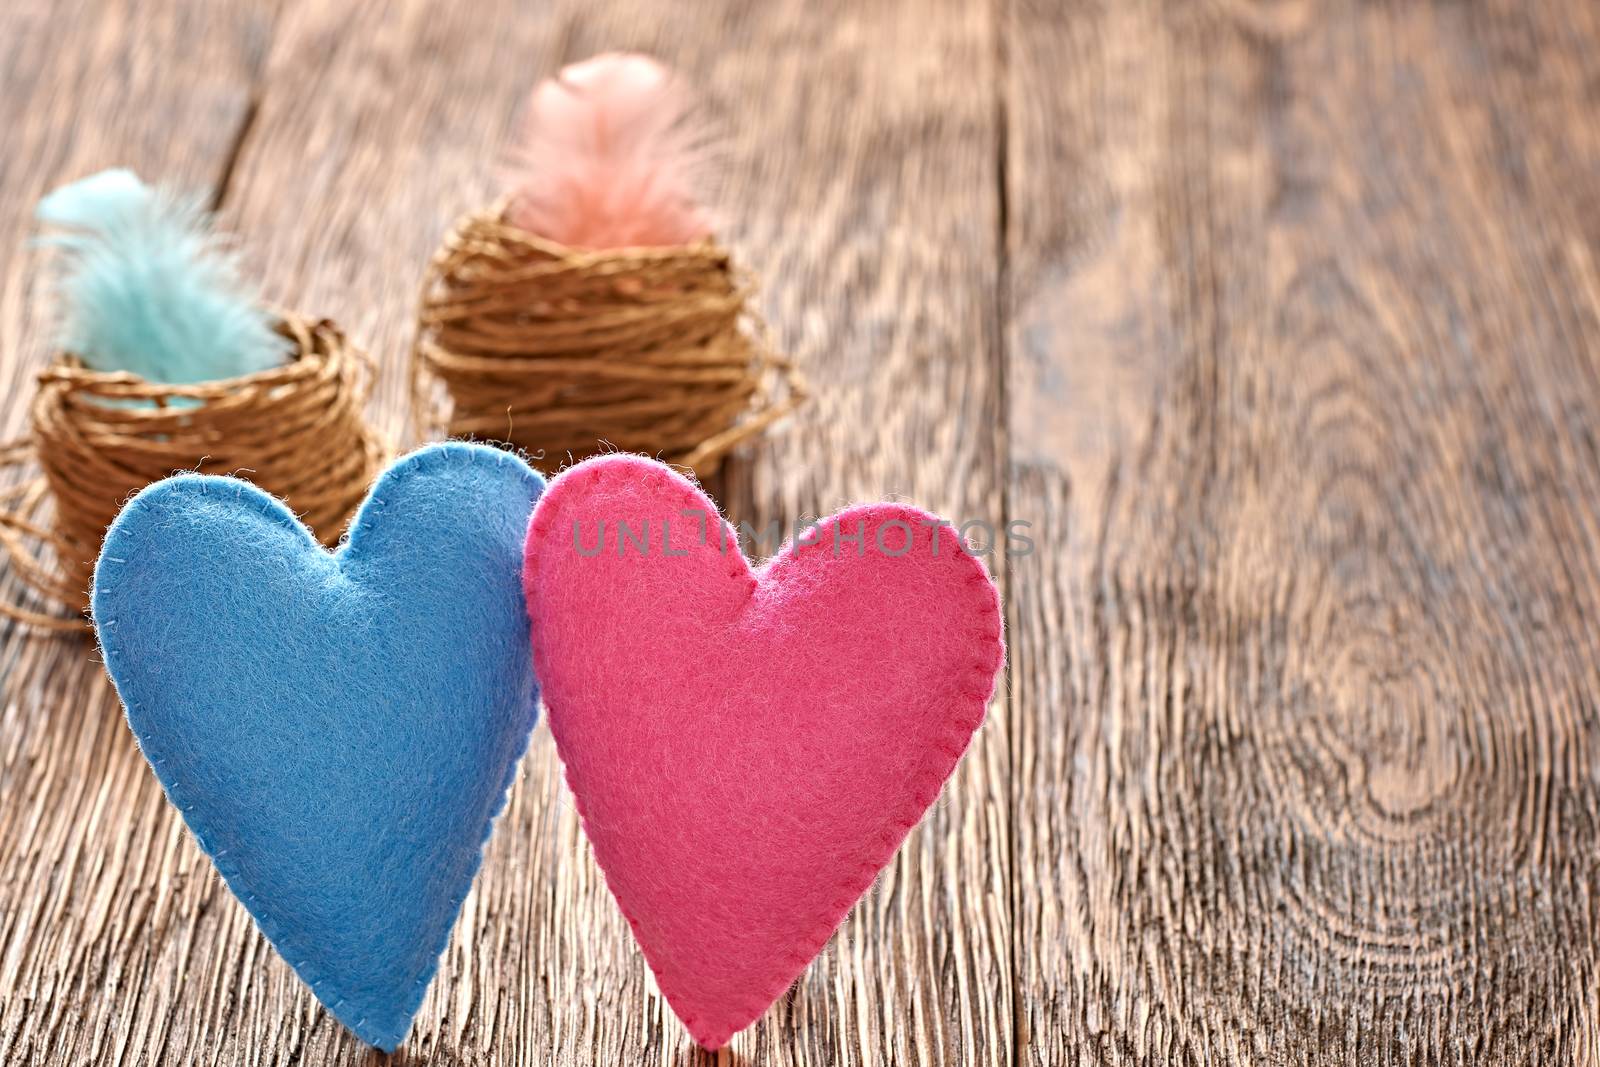 Love, Valentines Day. Hearts couple Handmade and nests with feathers on wooden background. Vintage romantic style. Vivid unusual creative greeting card, multicolored felt. Toned